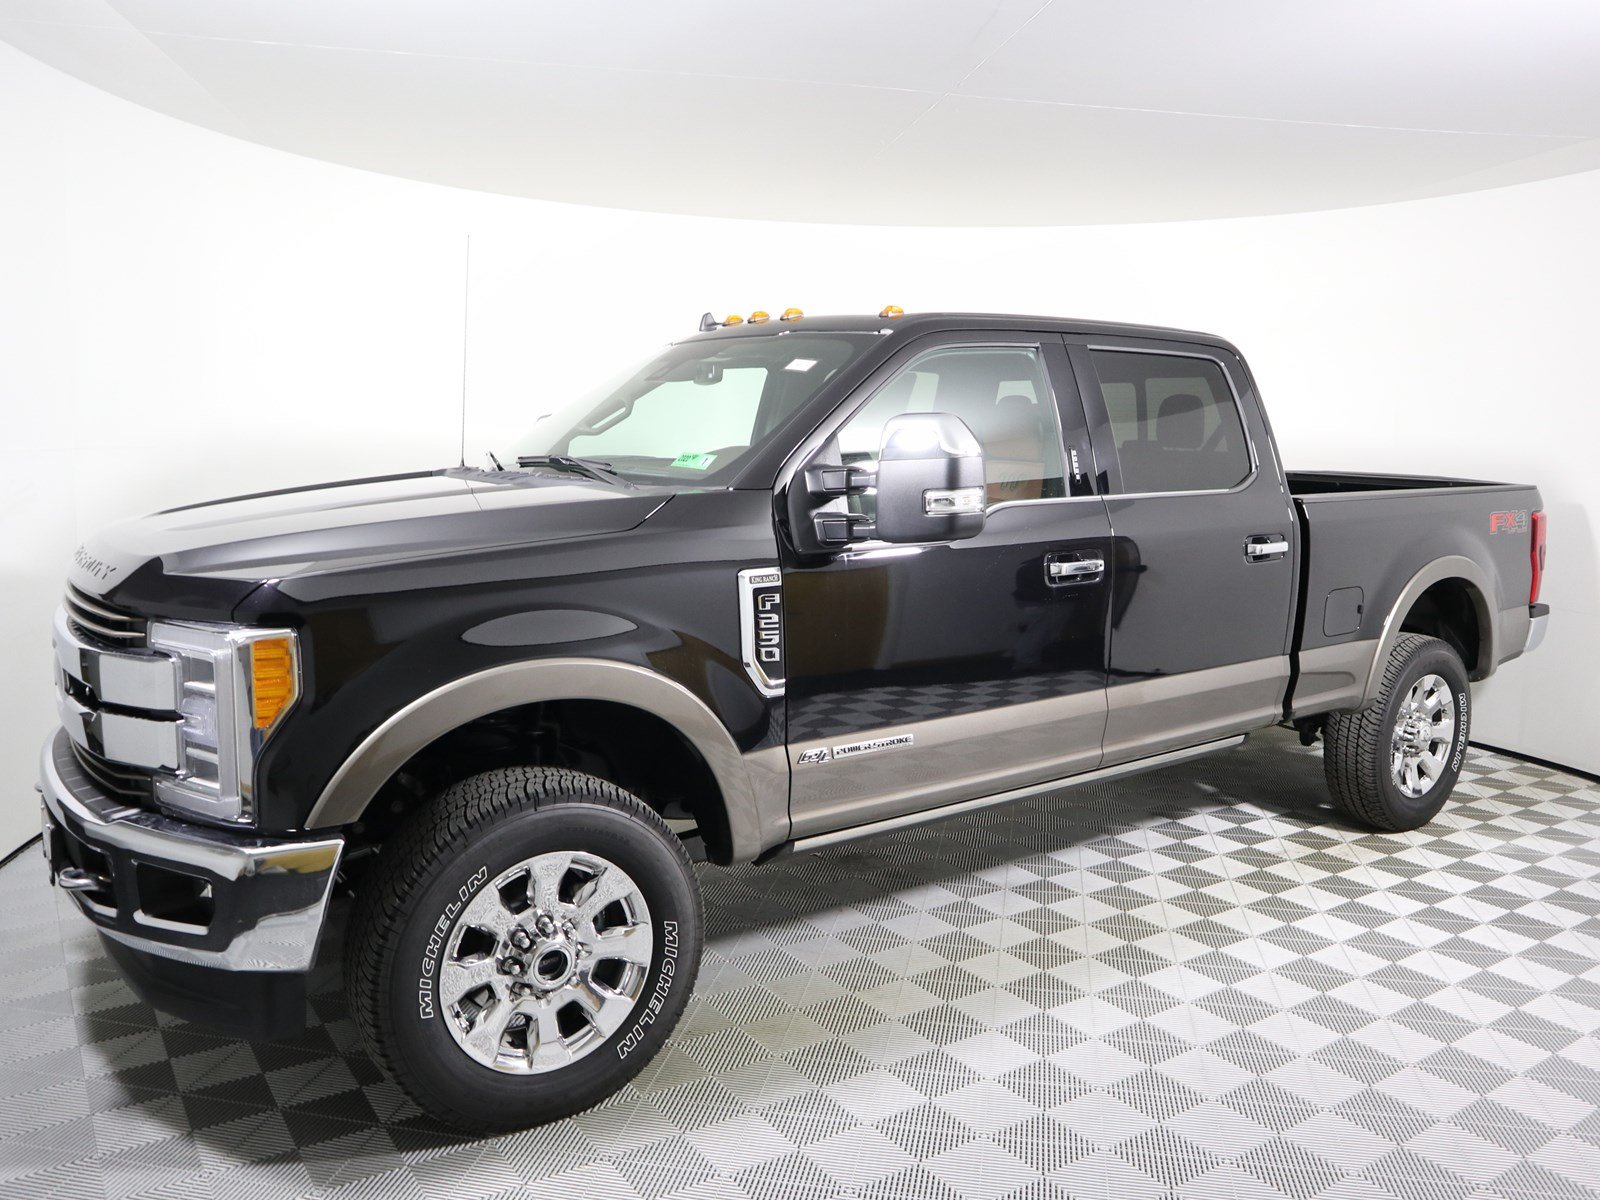 New 2019 Ford Super Duty F 250 Srw King Ranch Crew Cab Pickup In